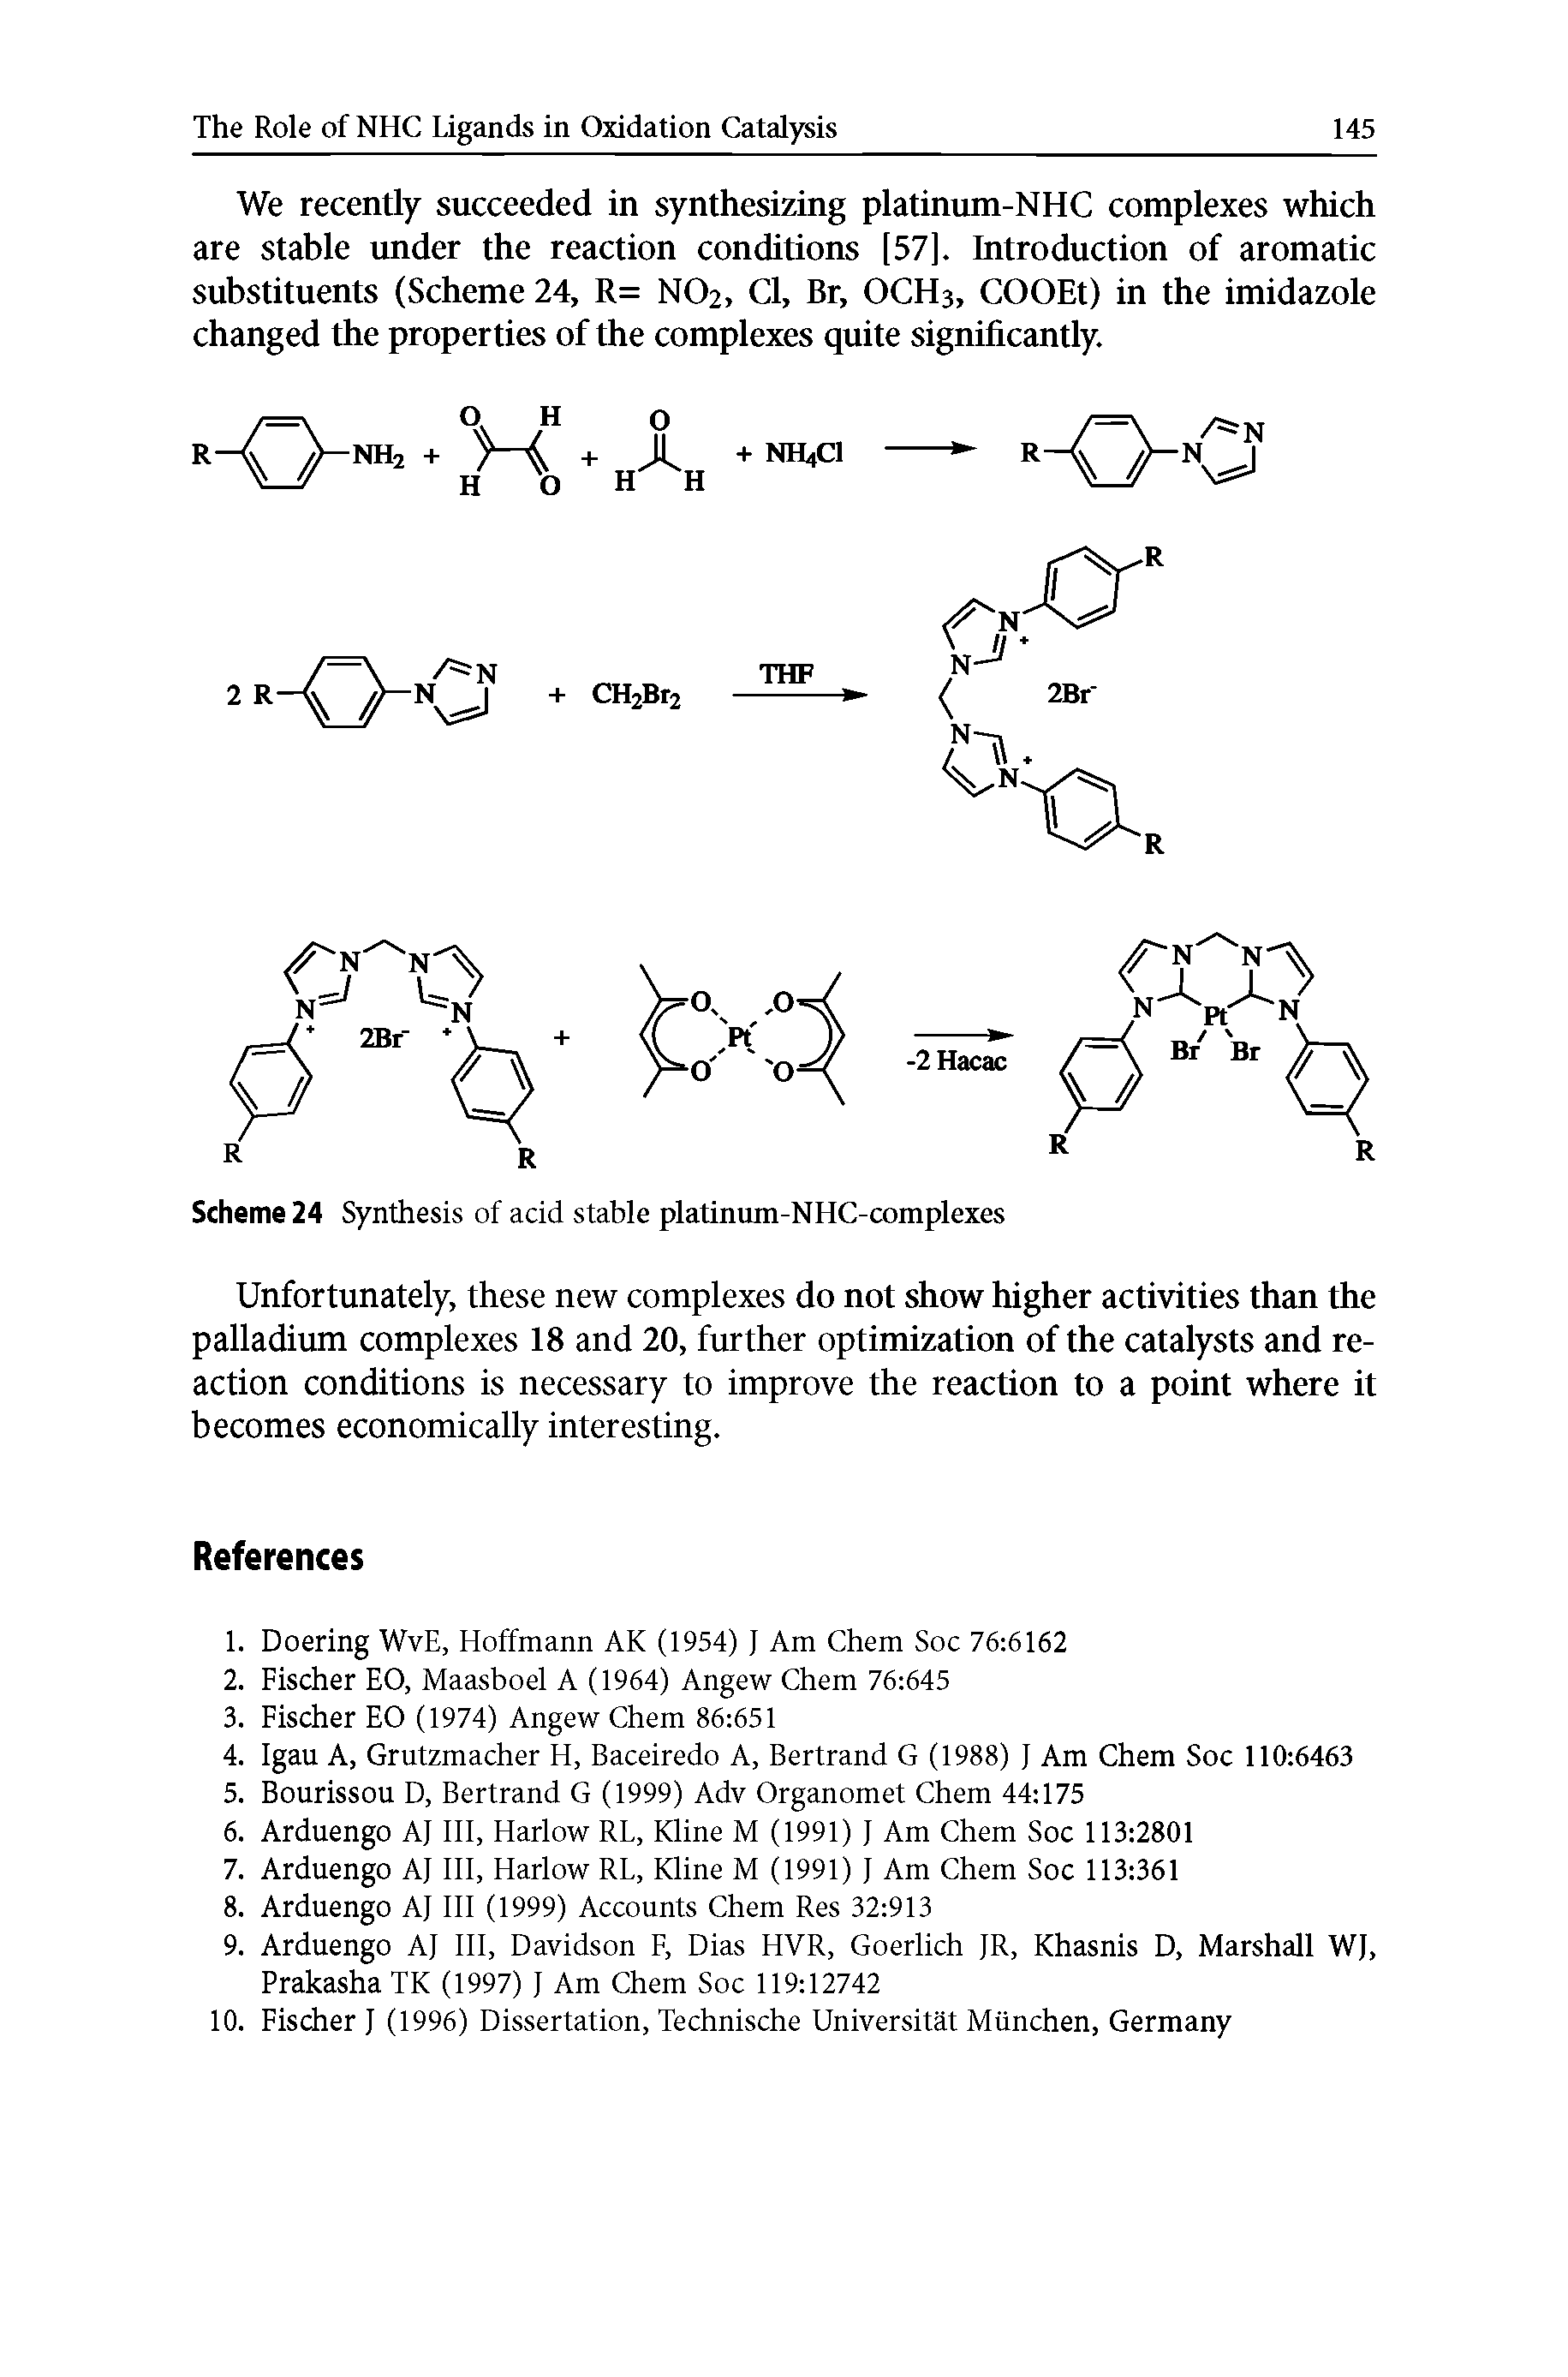 Scheme 24 Synthesis of acid stable platinum-NHC-complexes...